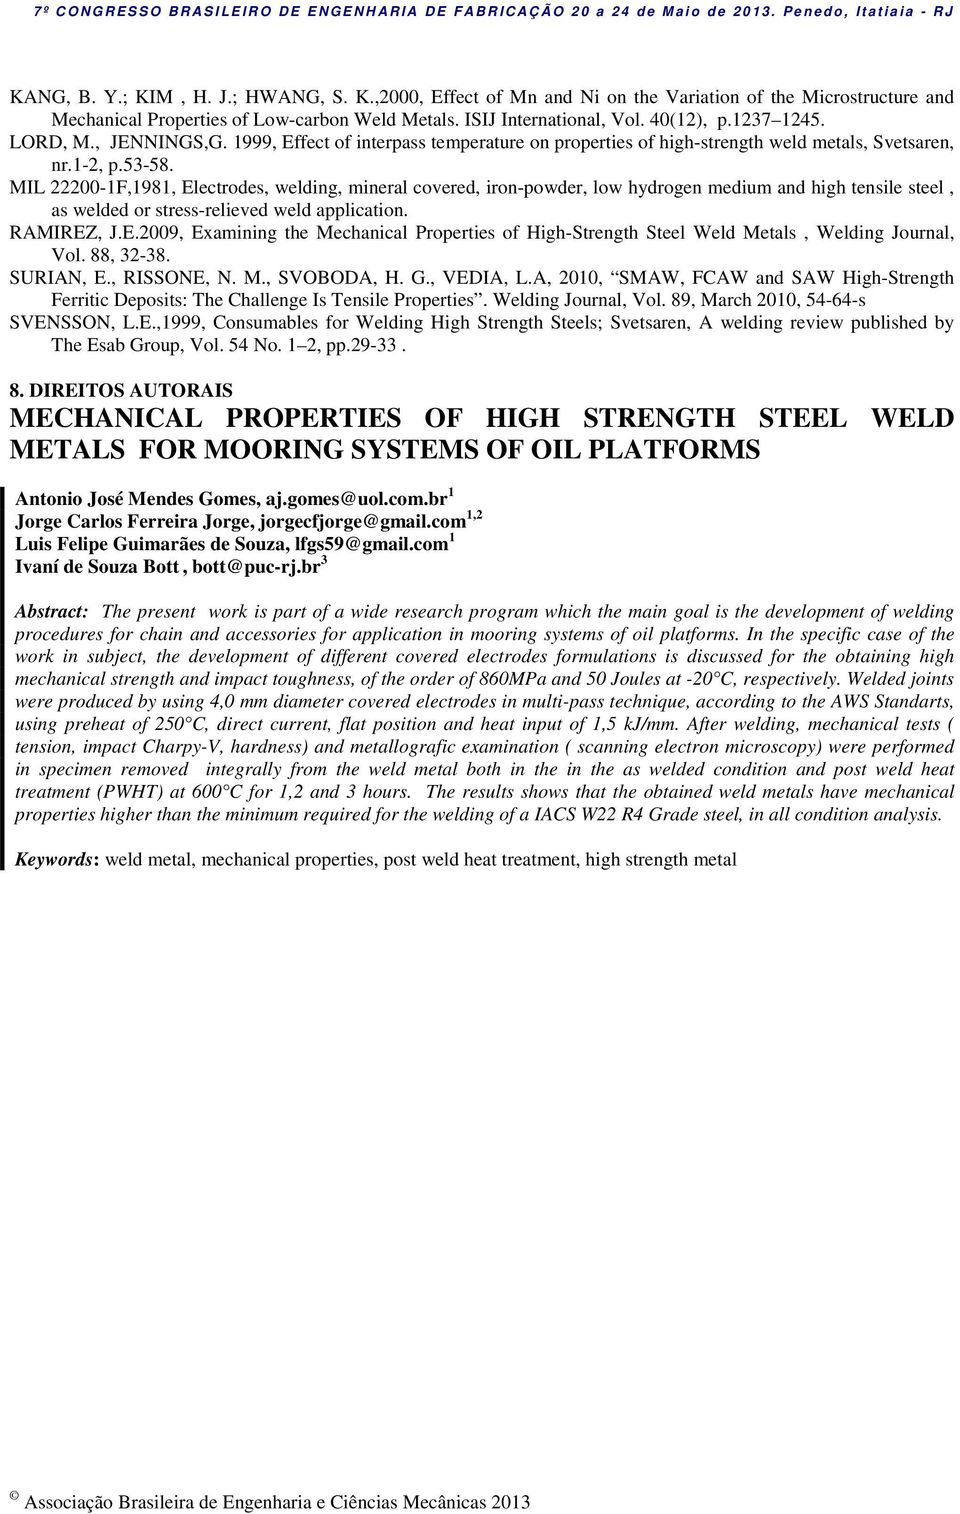 MIL 22200-1F,1981, Electrodes, welding, mineral covered, iron-powder, low hydrogen medium and high tensile steel, as welded or stress-relieved weld application. RAMIREZ, J.E.2009, Examining the Mechanical Properties of High-Strength Steel Weld Metals, Welding Journal, Vol.